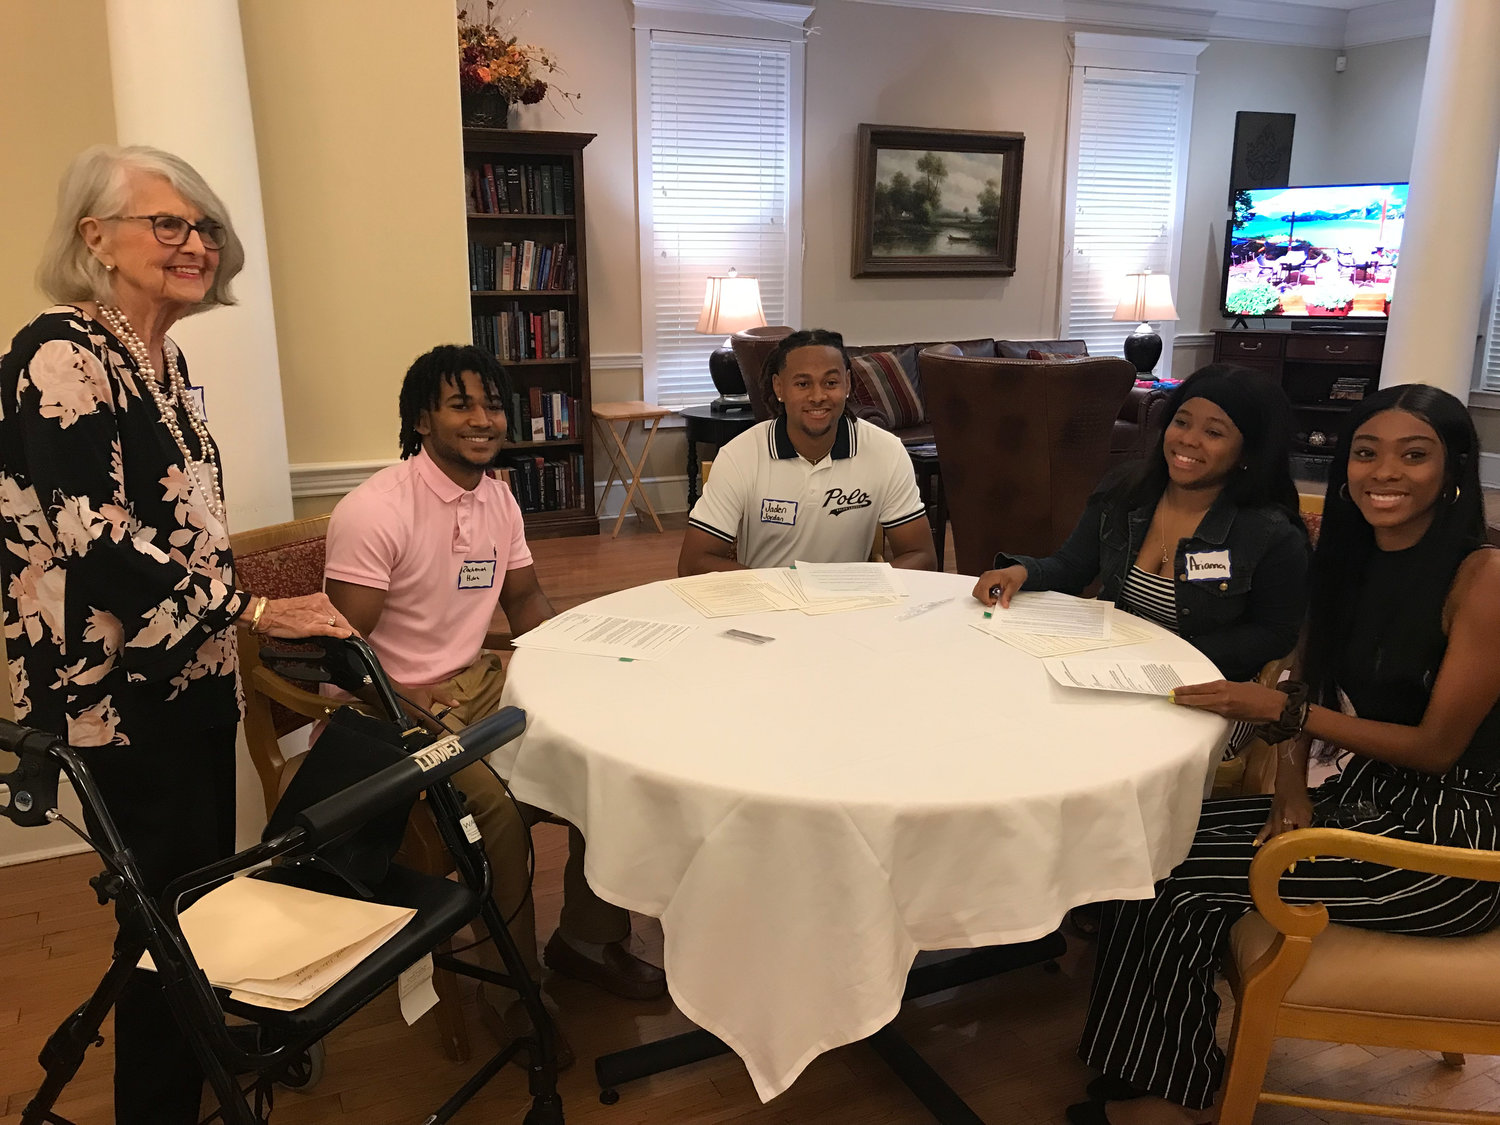 Pictured here, from left: Ms. Daisy Seale Moore, Zachariah Hixon, Jaden Jordan, Arianna McWilliams and Kendall Kittrell. Four $1,000 scholarships were awarded to local minority education students through the Ms. Daisy Seale Moore Minority Educator’s Fund. The four students have signed letters of intent to teach in Baldwin County upon their graduations.